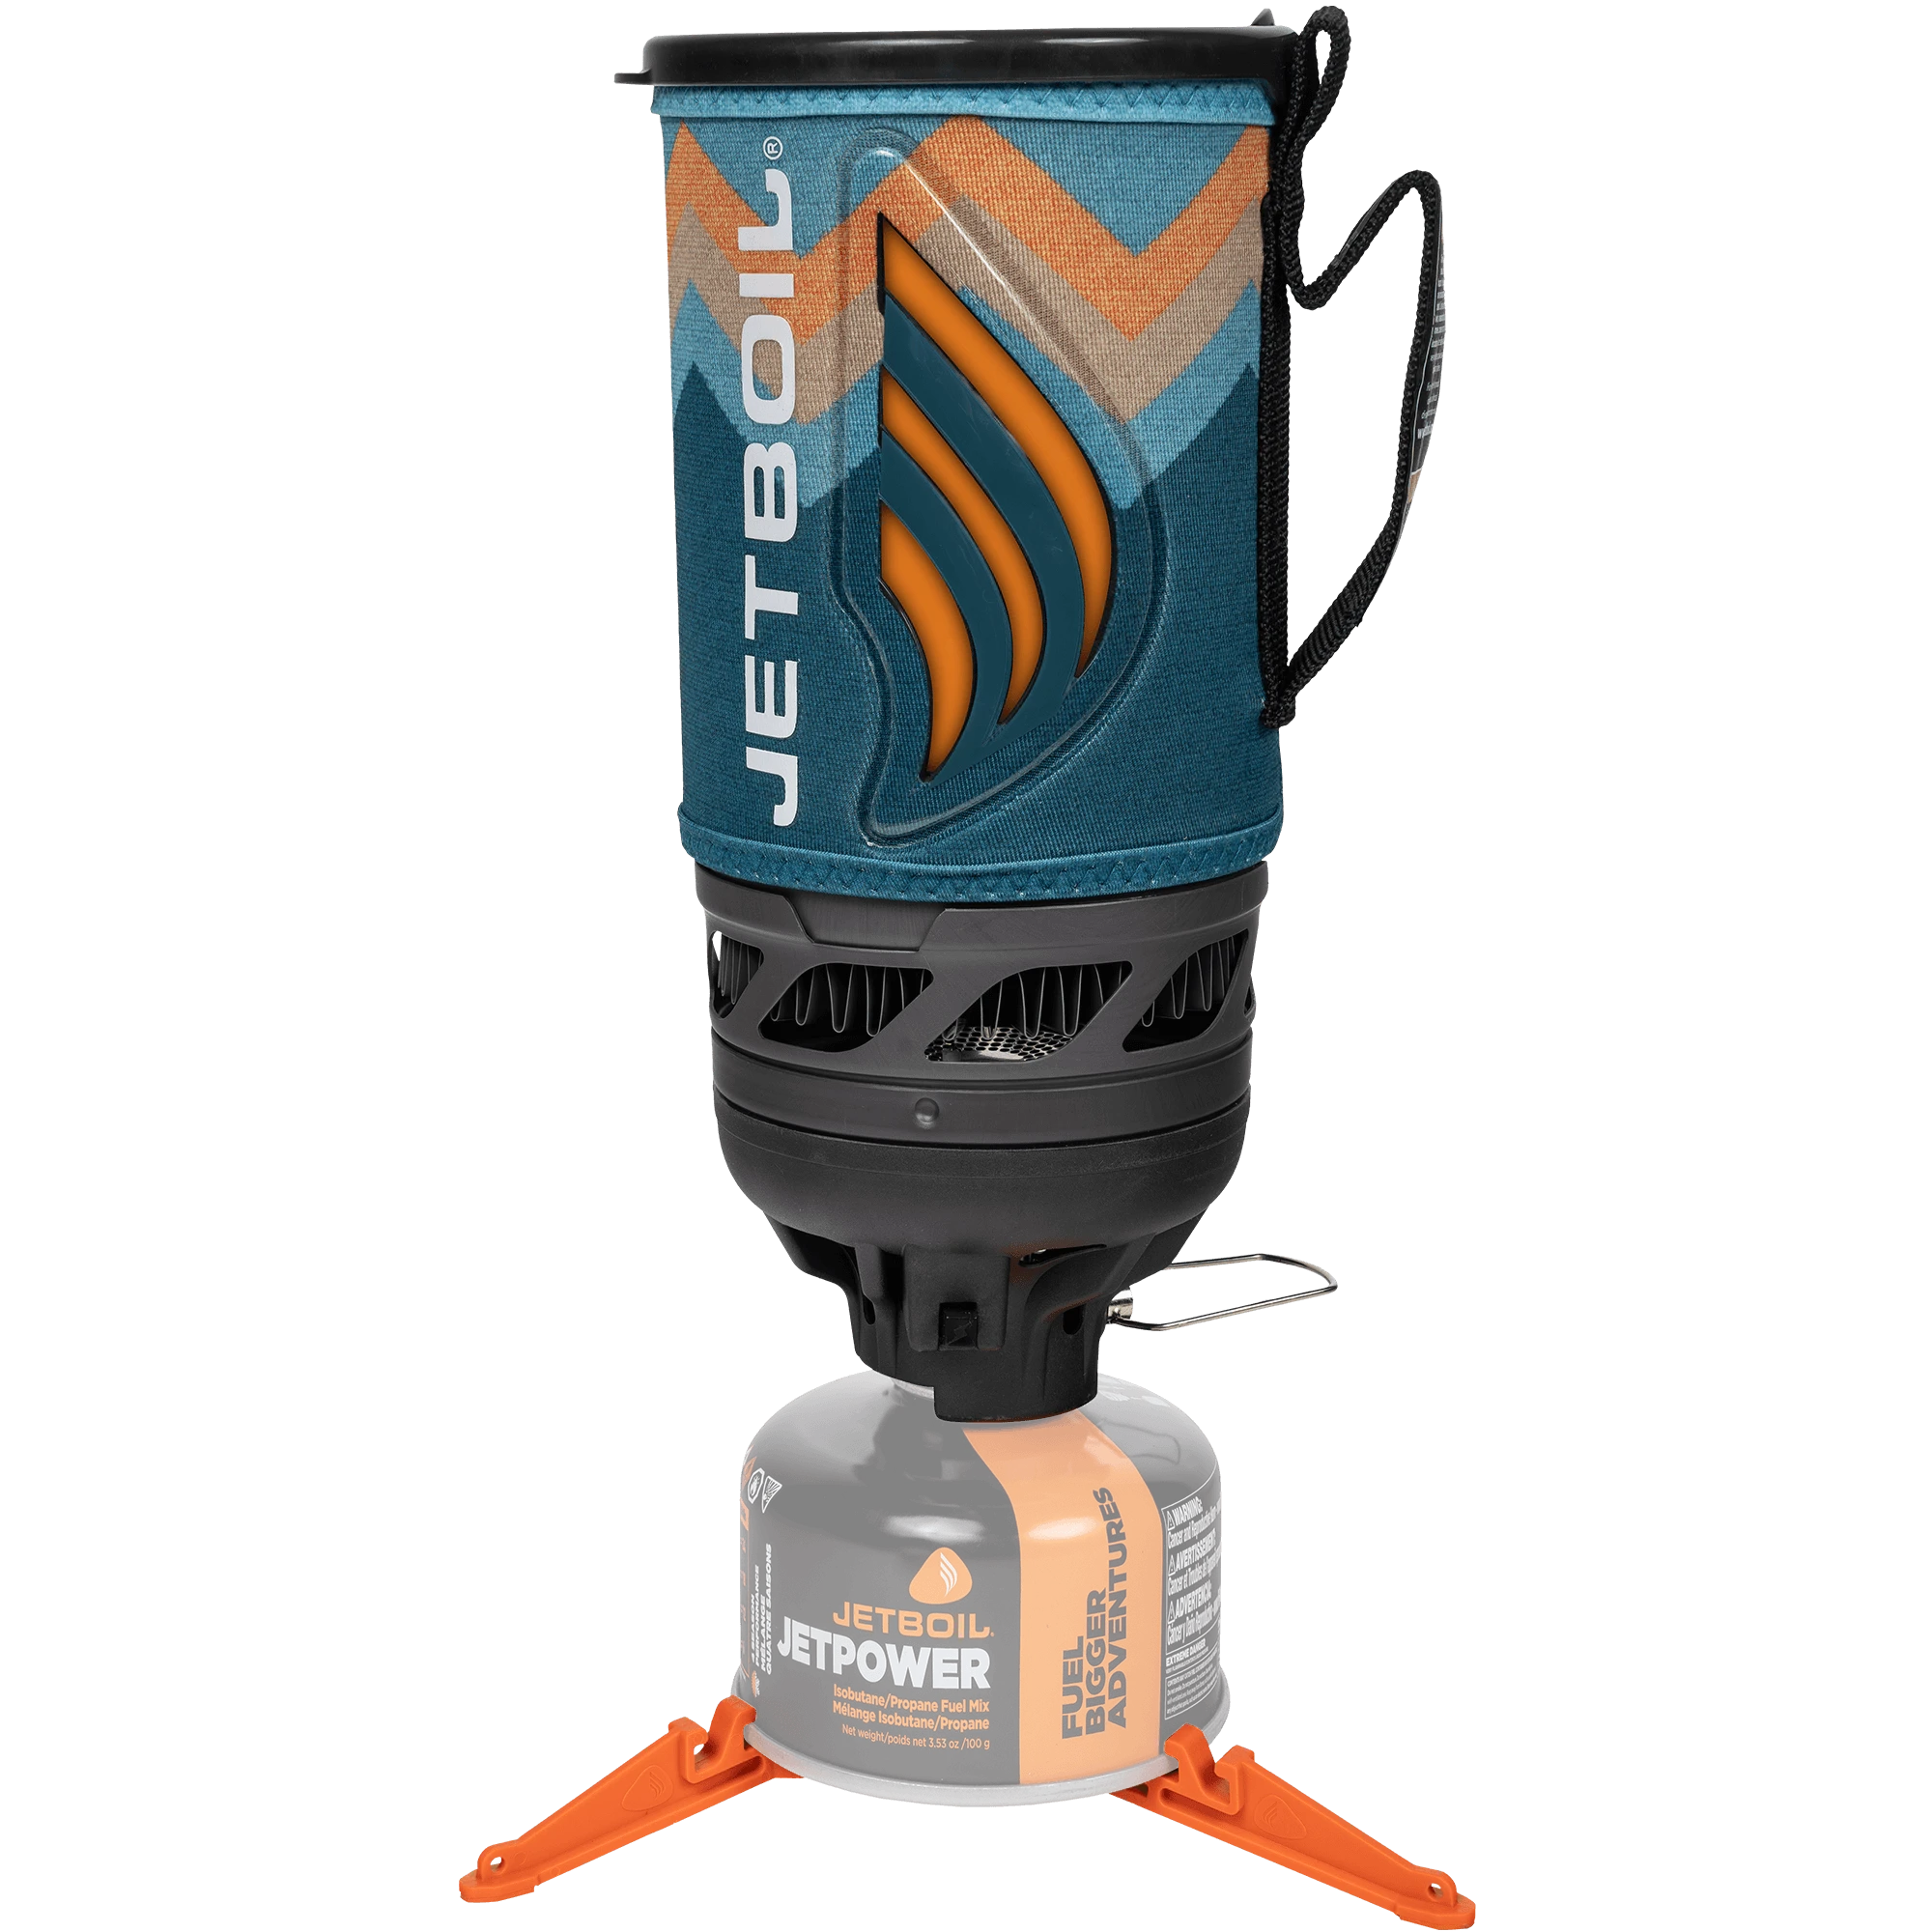 Hot Heat Indicator the Jetboil Flash Cooking System cozy in the color Mountain Stripes